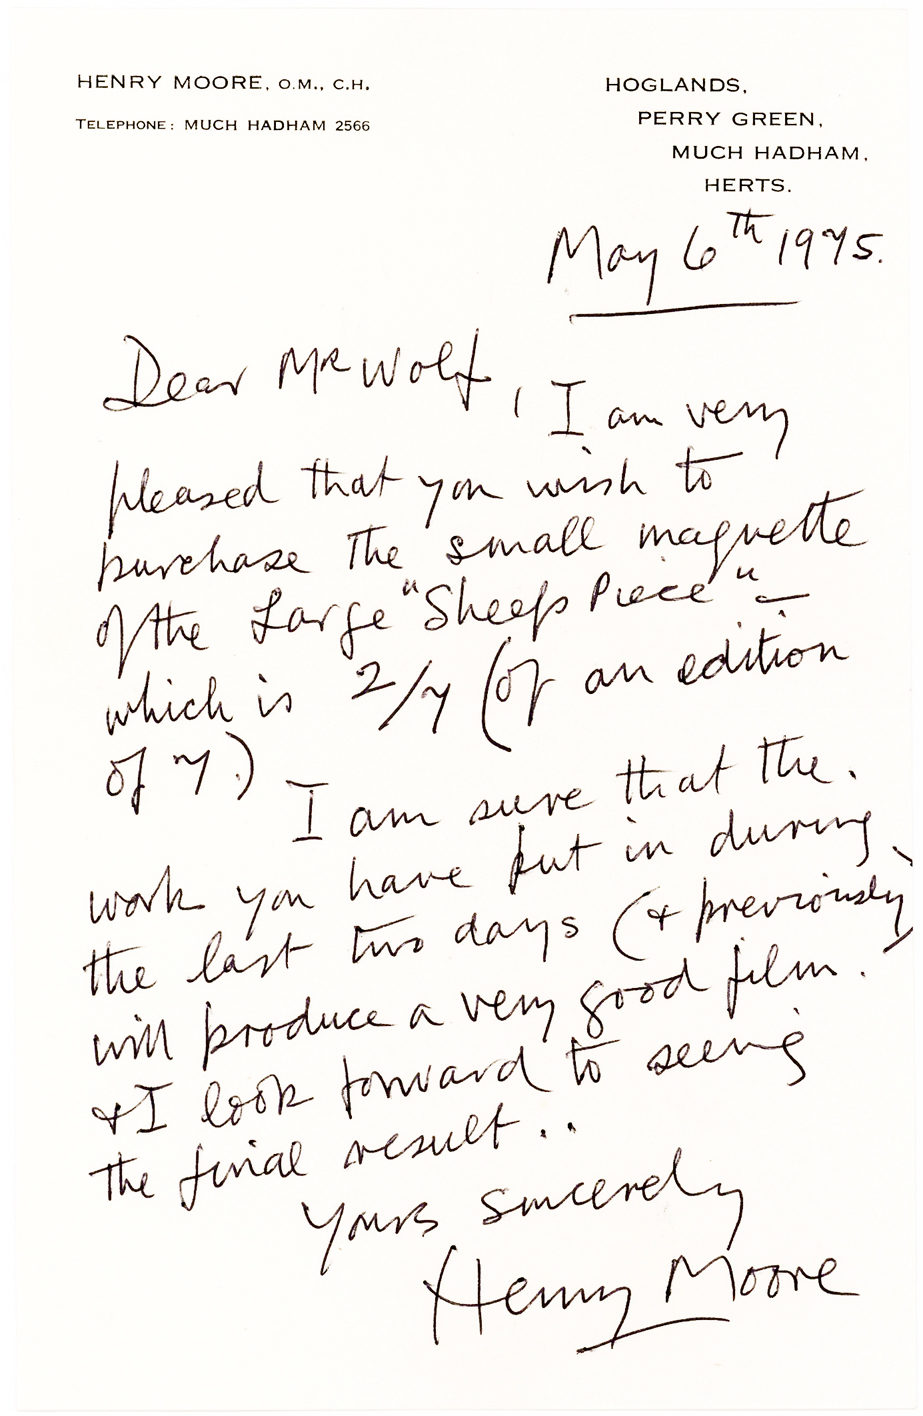 Autograph Letter from the English Sculptor Henry Moore to the American Filmmaker who is Buying his Sculpture